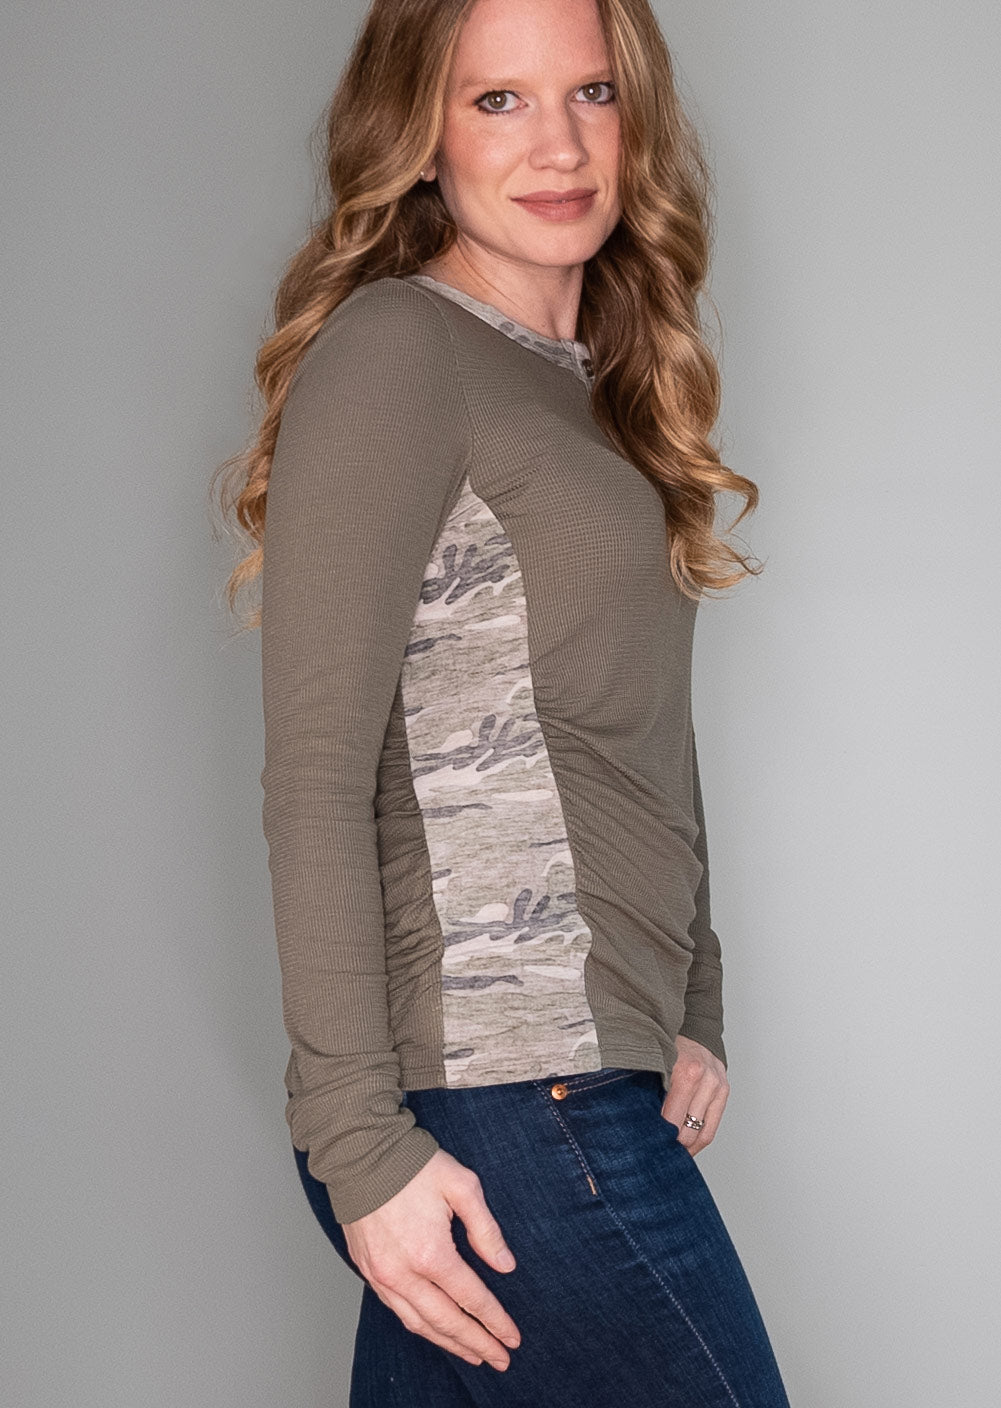 Olive Green Long Sleeve Camo Henley Top